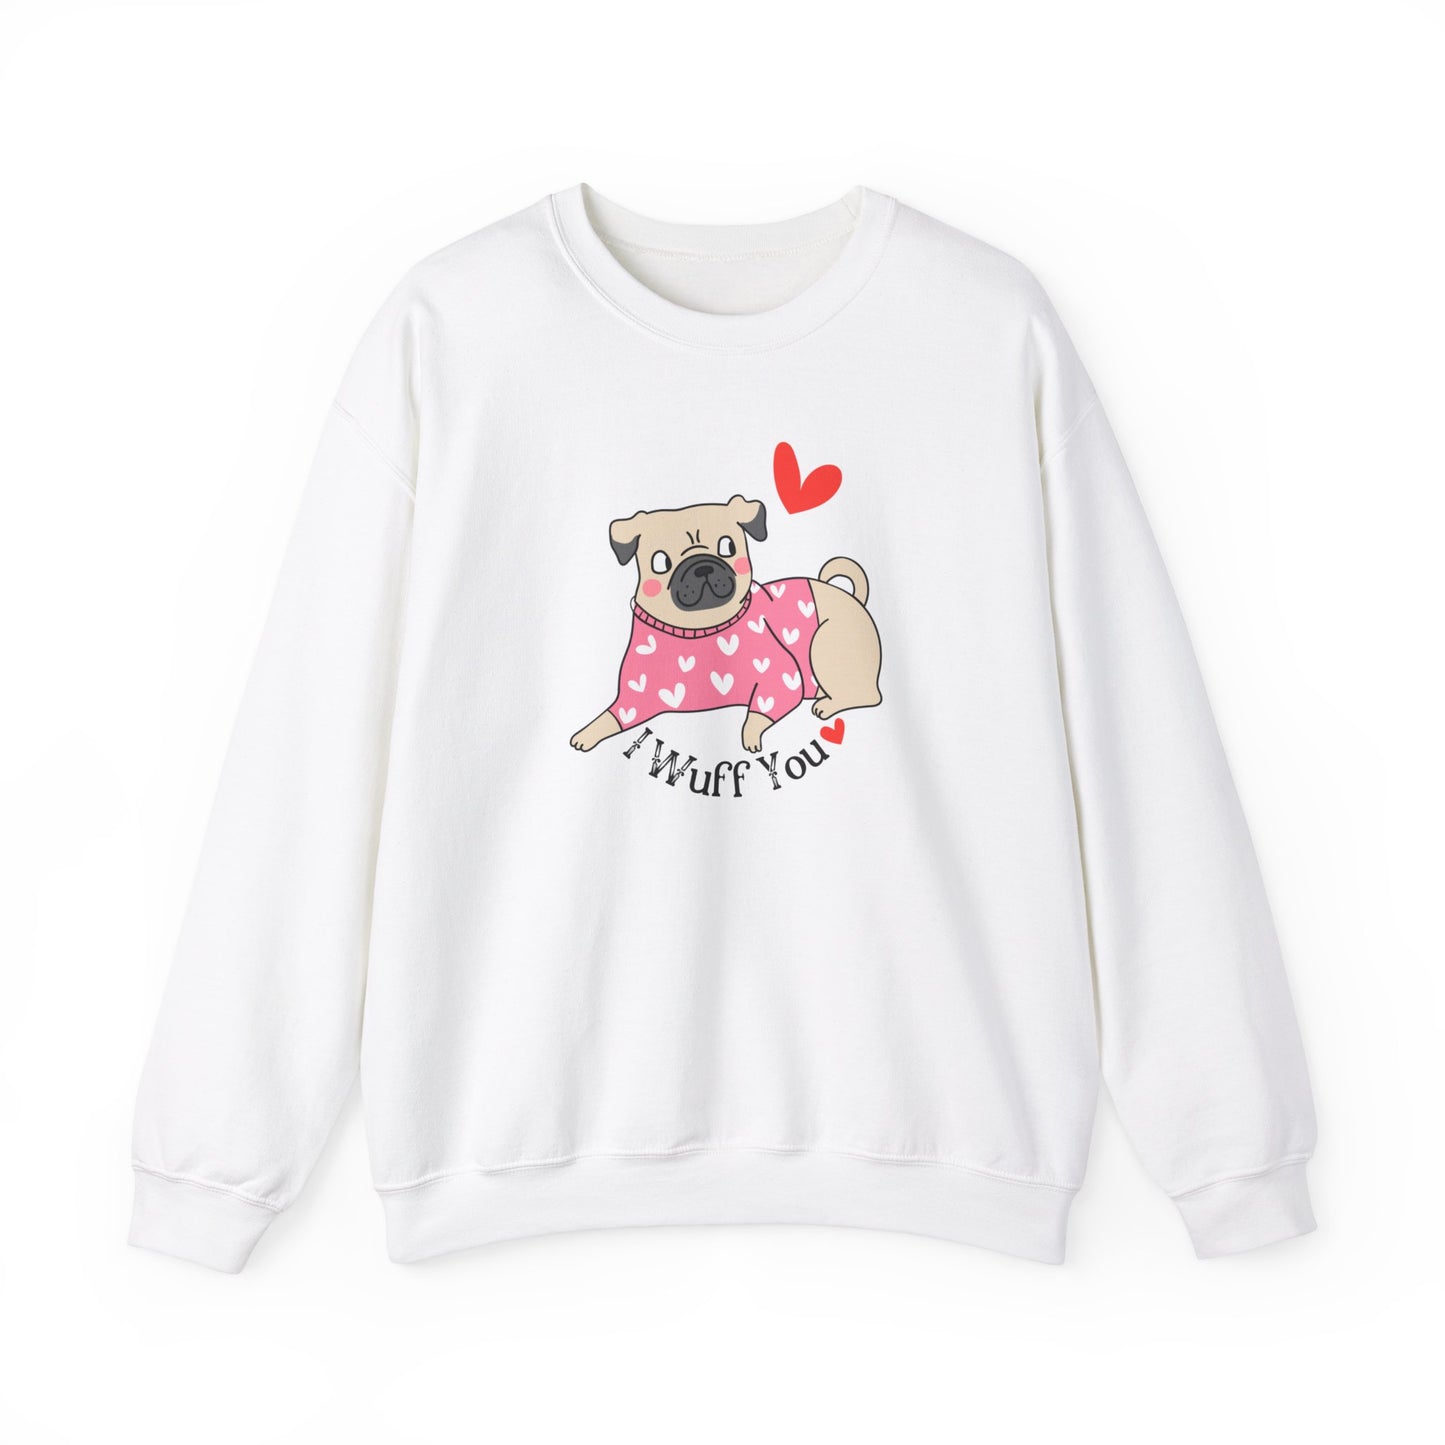 I Wuff You Valentines Day Unisex Heavy Blend Crewneck Sweatshirt, Dog Valentines Shirt, Gift for Her or Him for Valentines Day